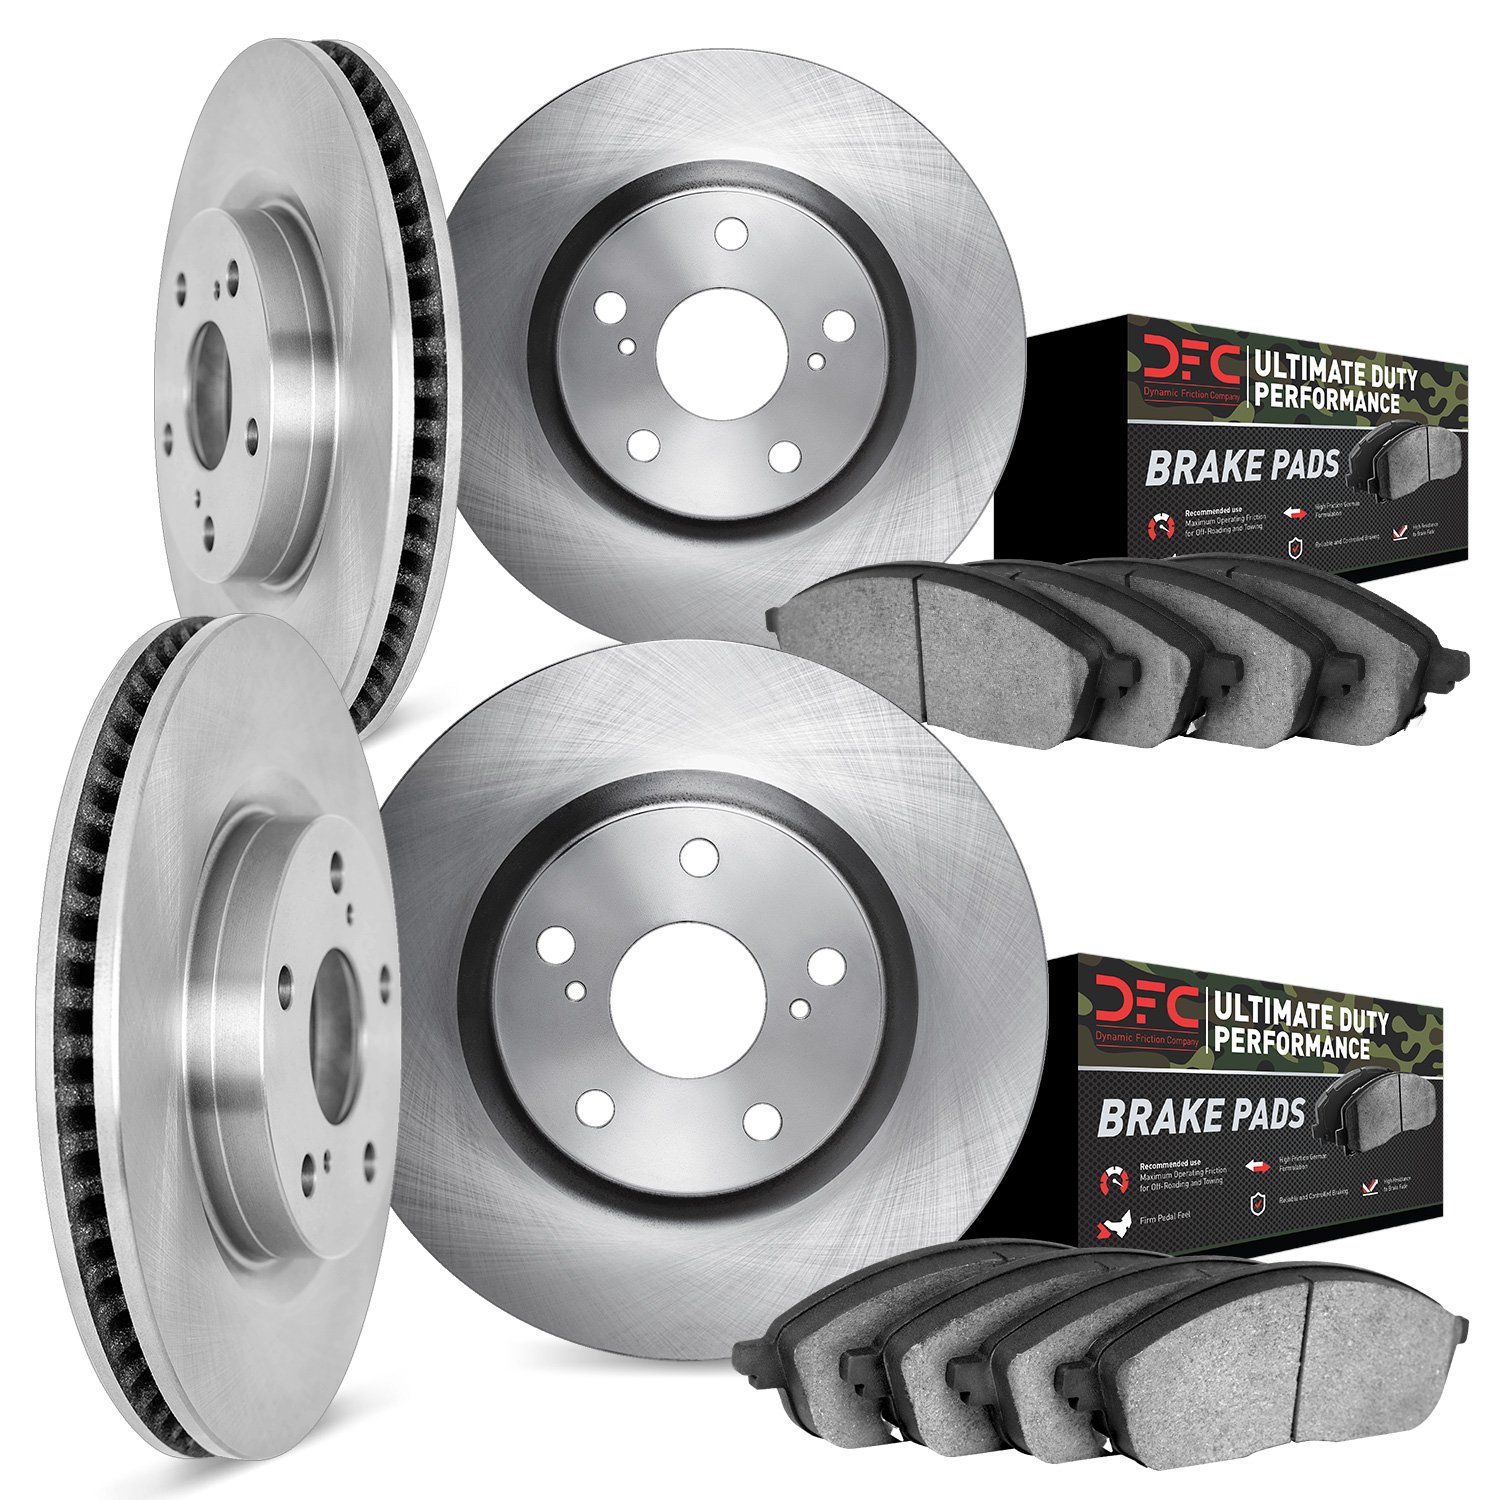 6404-40006 Brake Rotors with Ultimate-Duty Brake Pads, 2006-2018 Mopar, Position: Front and Rear